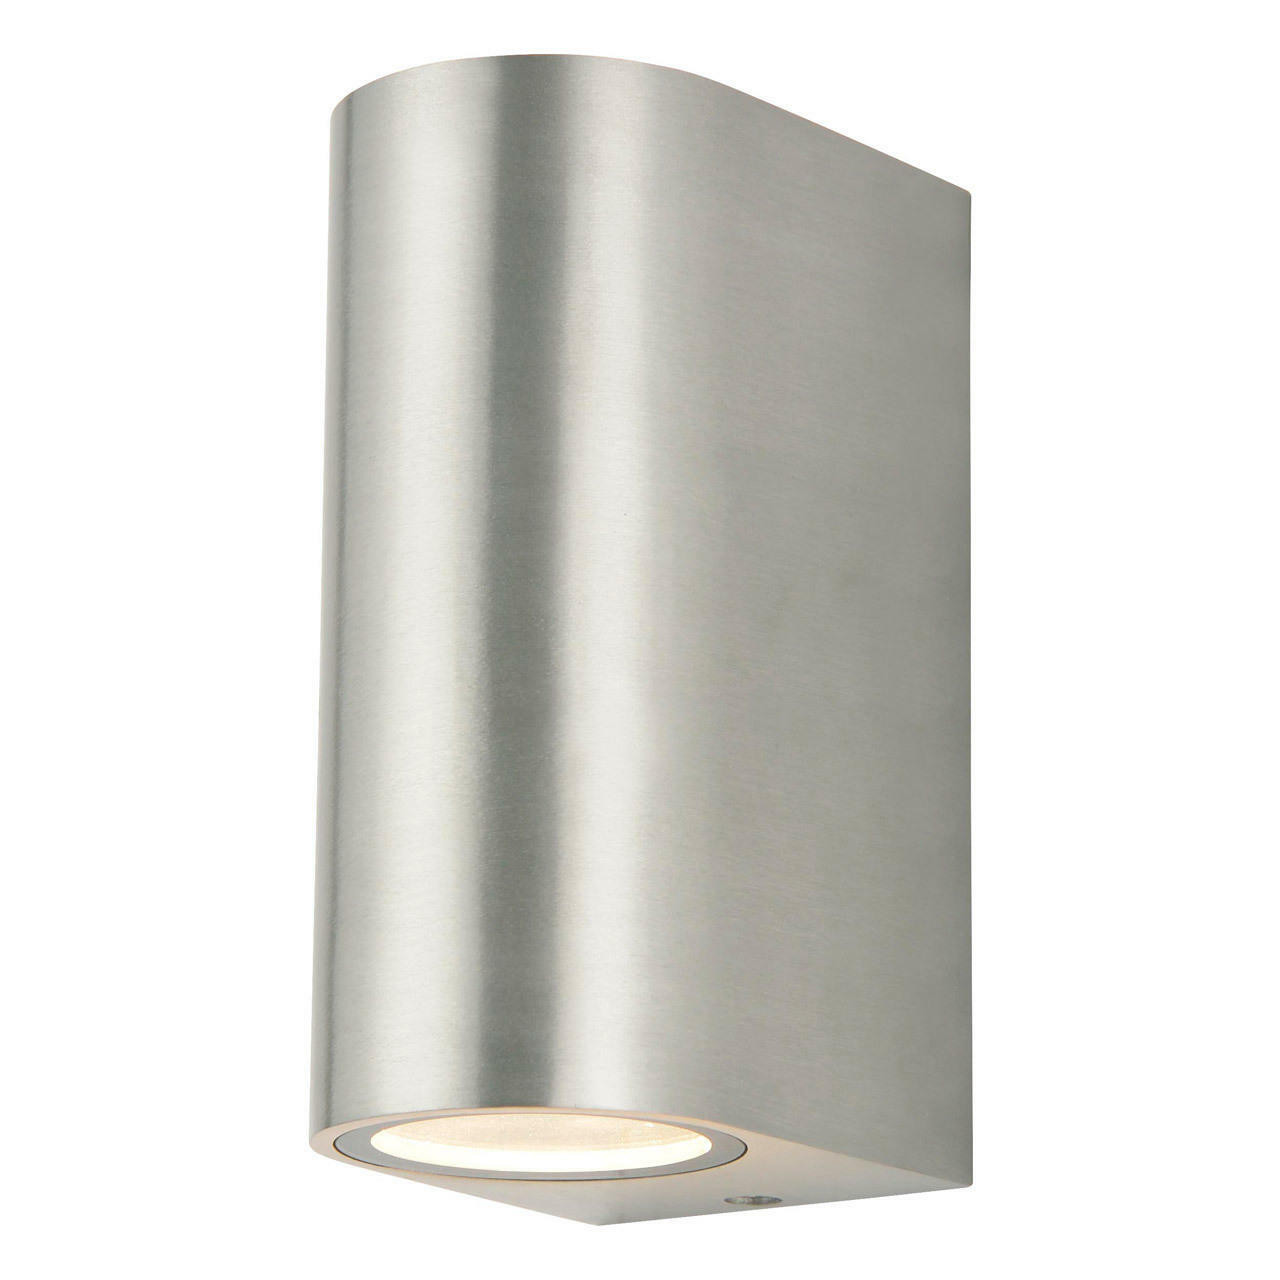 Photos - Chandelier / Lamp Zink ANTAR Outdoor Up and Down Wall Light Stainless Steel ZN-20930-SST